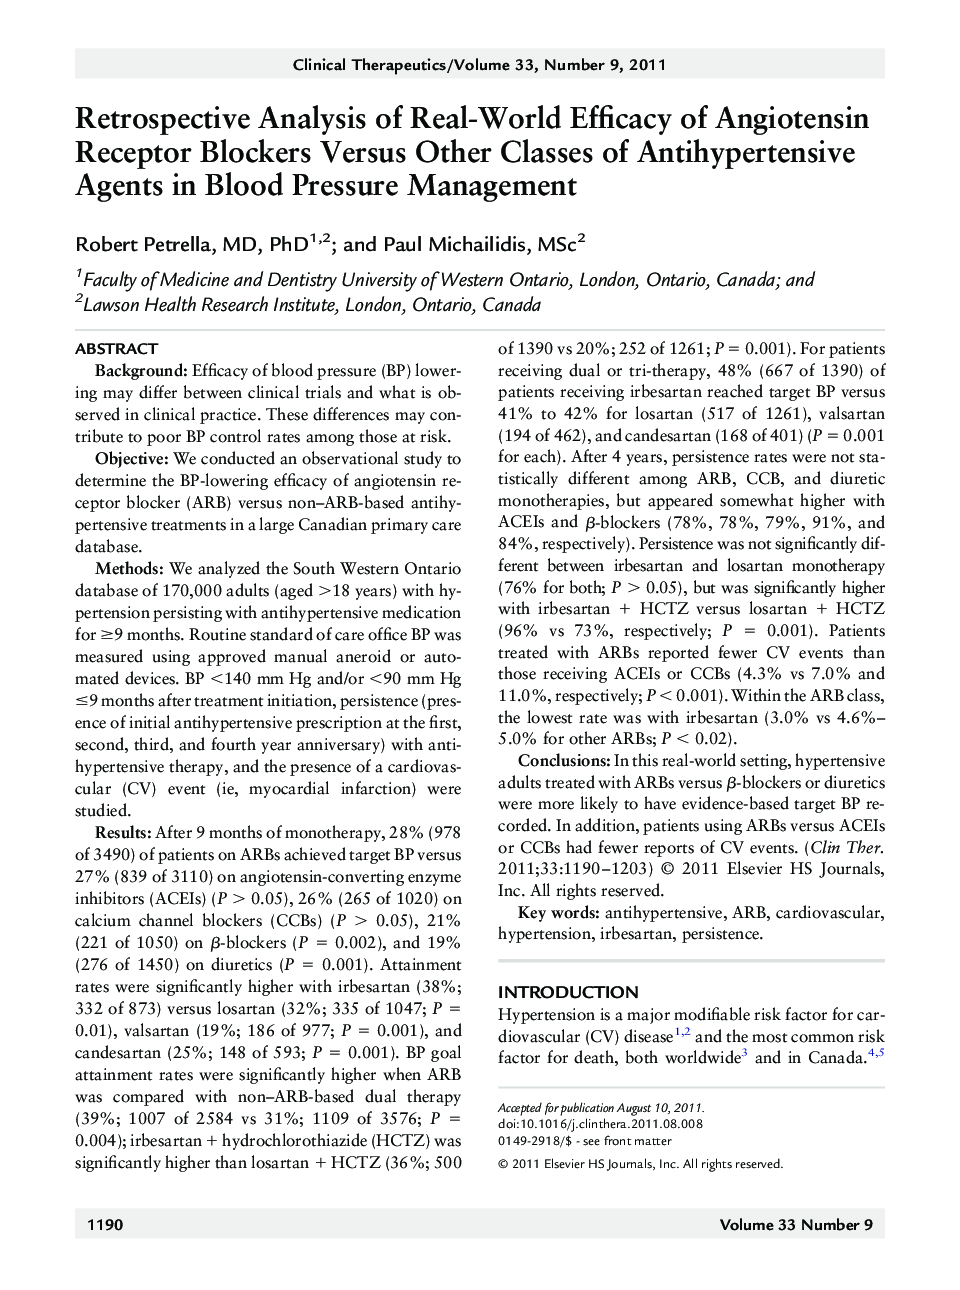 Retrospective Analysis of Real-World Efficacy of Angiotensin Receptor Blockers Versus Other Classes of Antihypertensive Agents in Blood Pressure Management